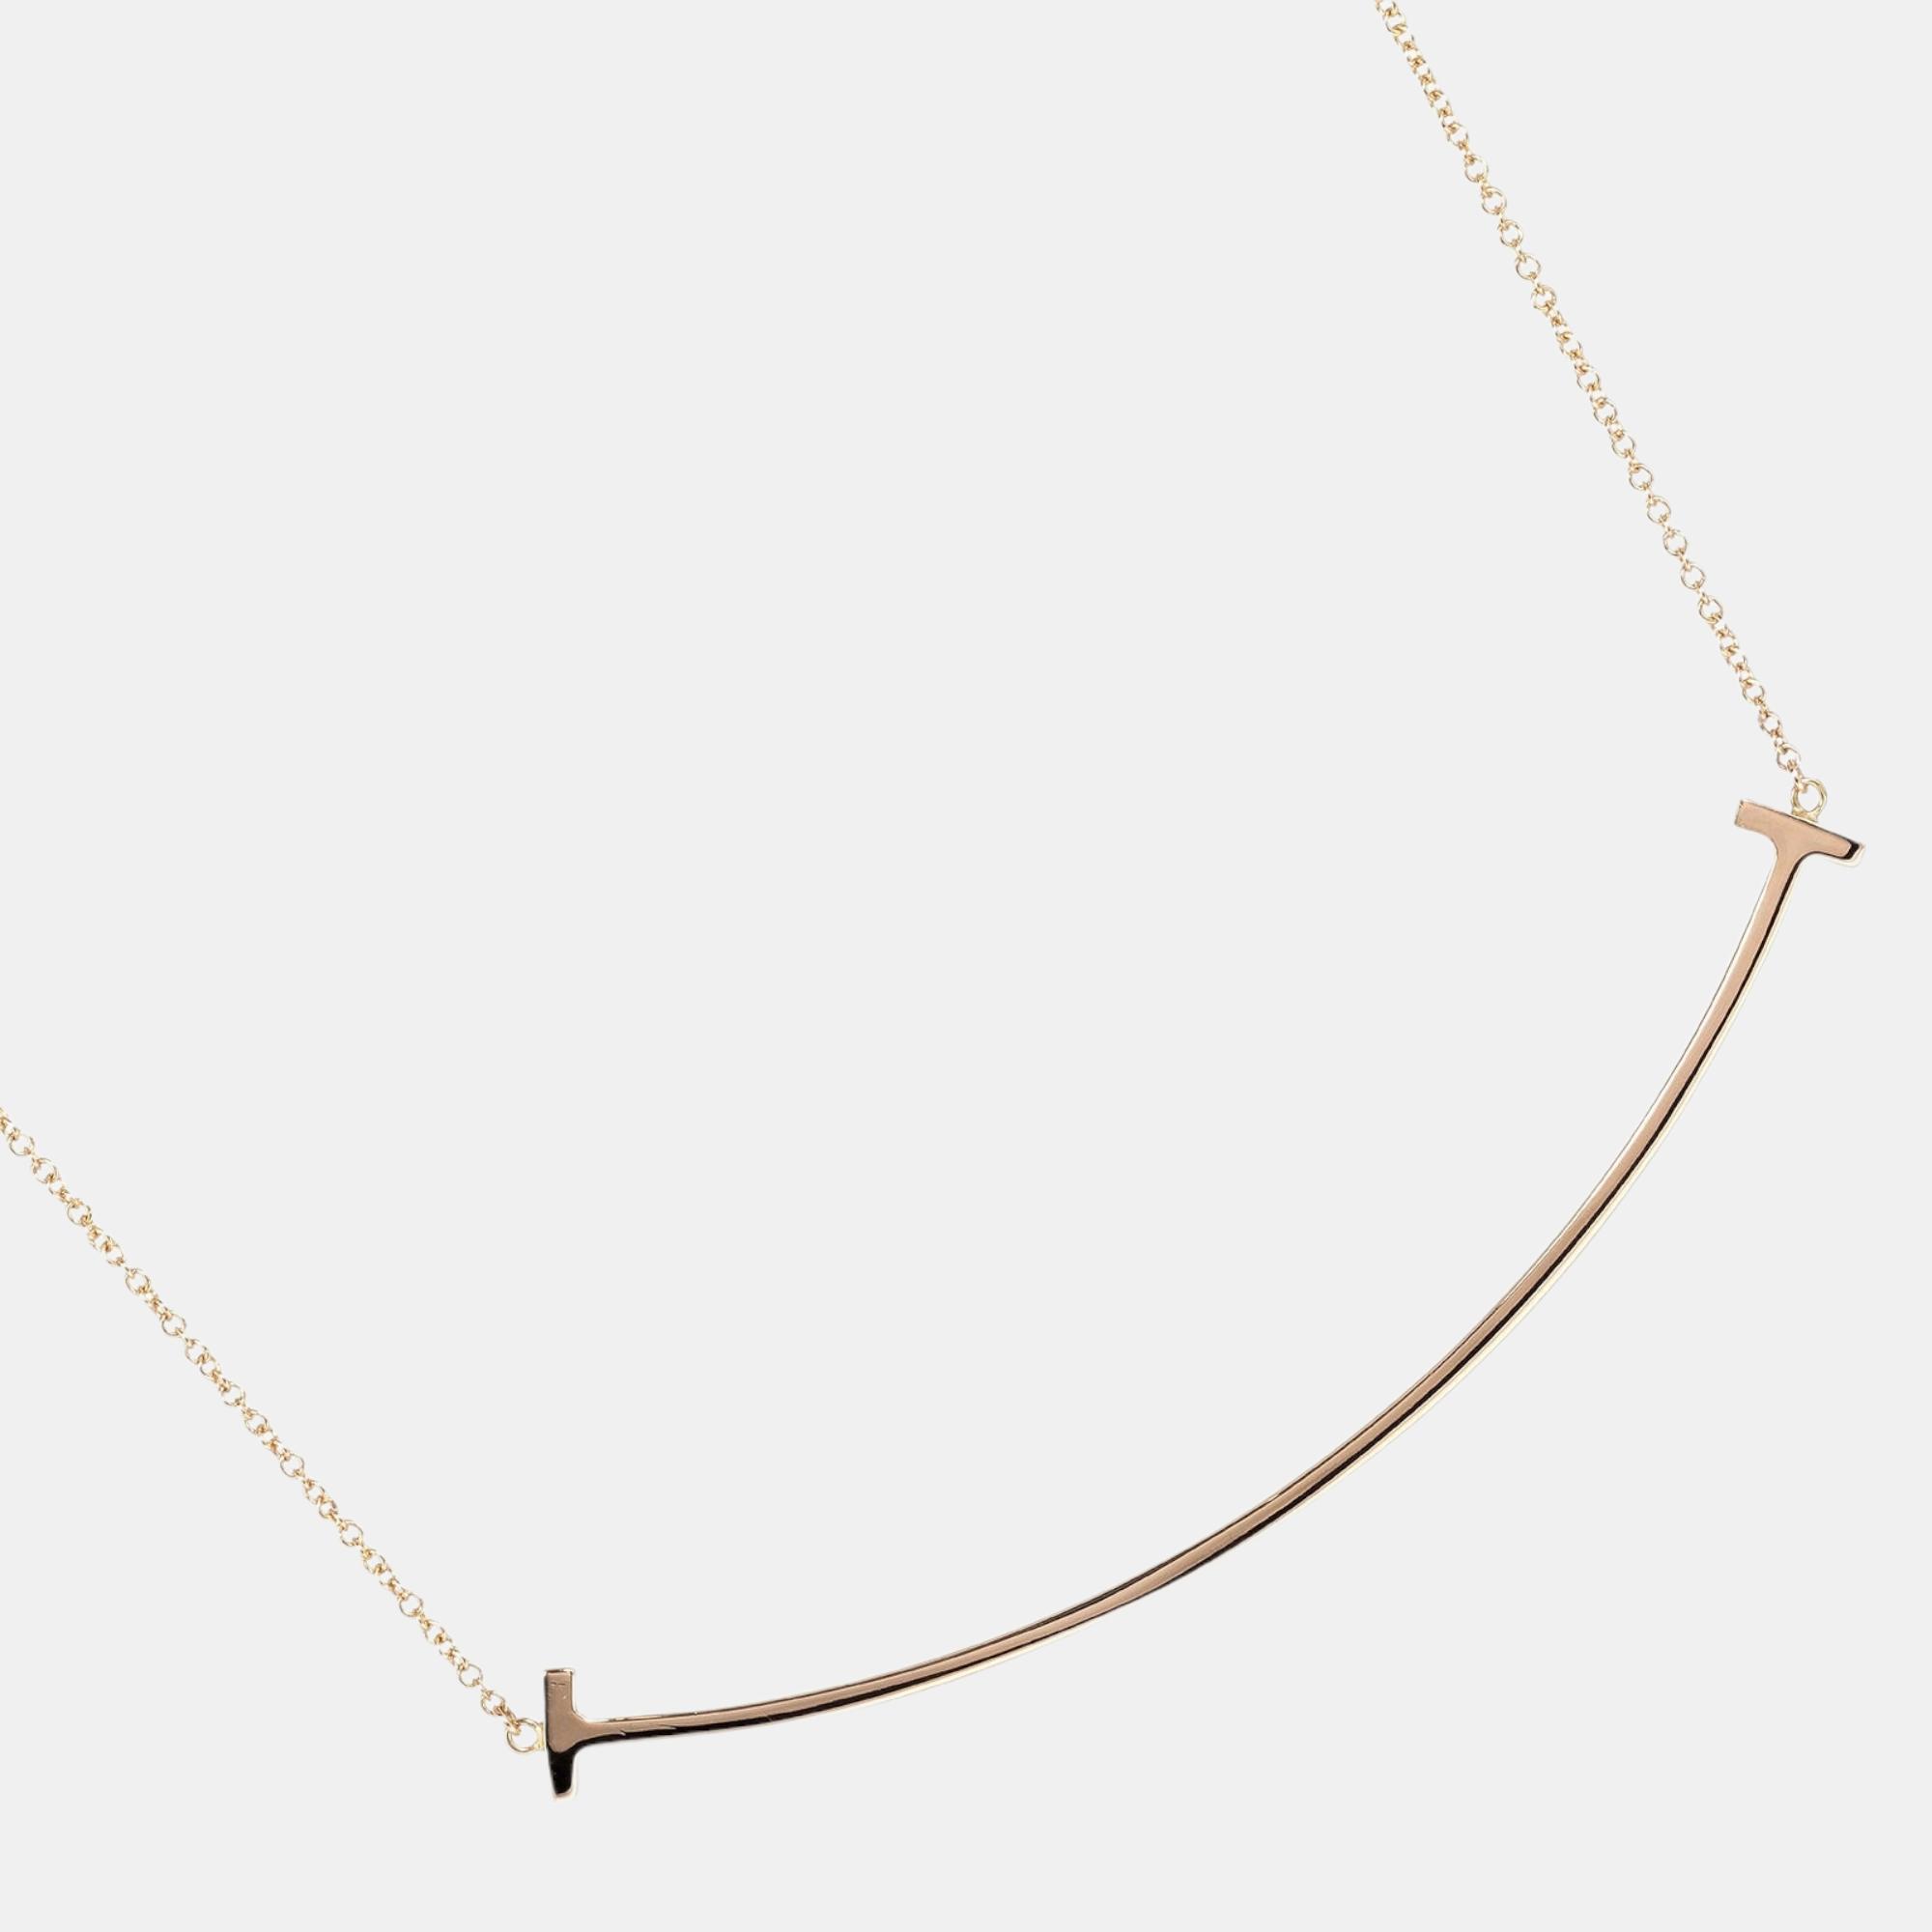 Elevate your elegance with this fine jewelry necklace from Tiffany. Exquisite craftsmanship meets timeless design in this stunning piece an embodiment of luxury and sophistication that complements every neckline.